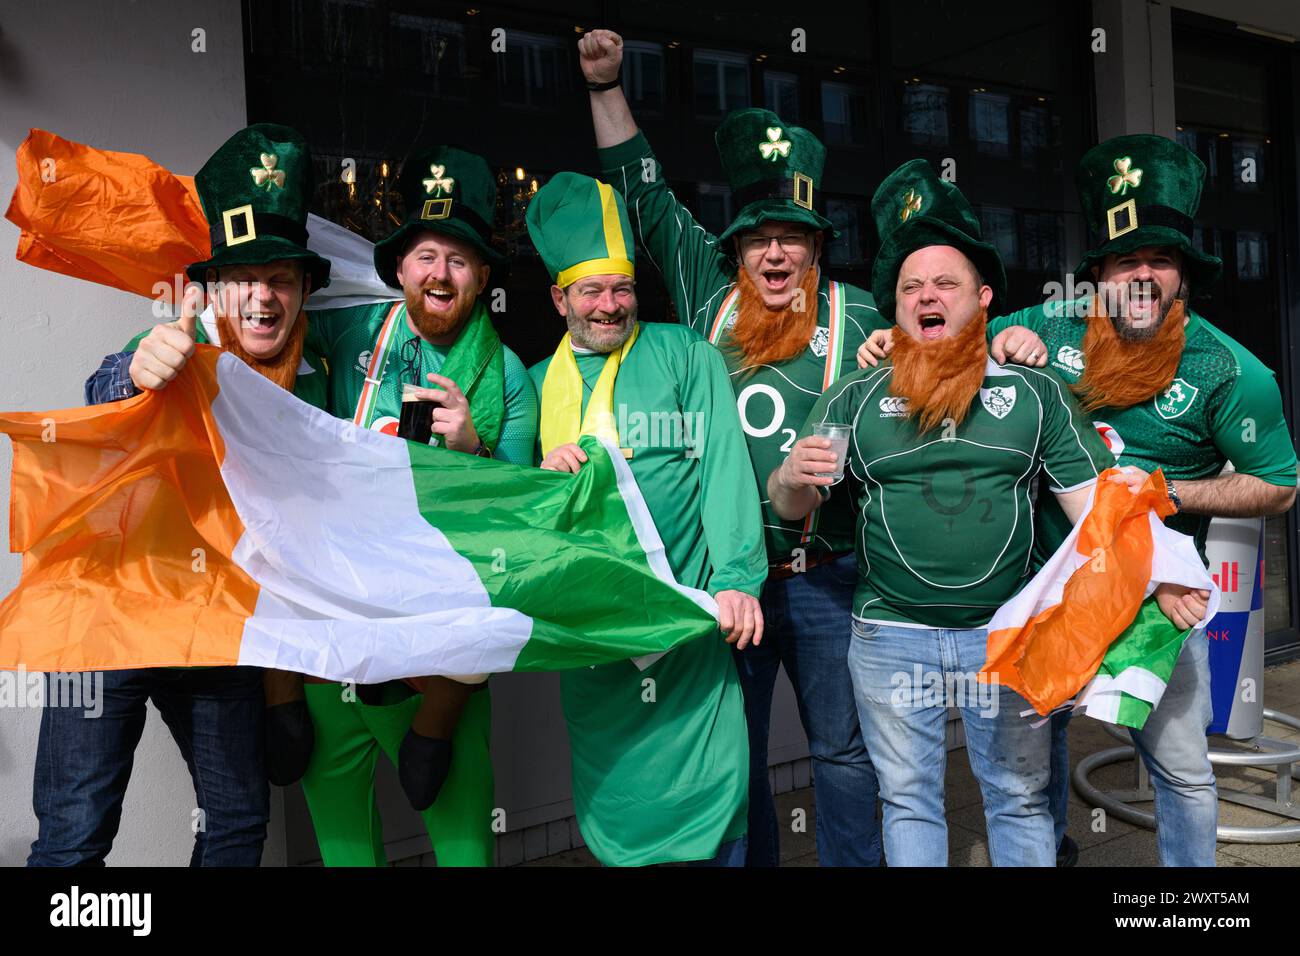 Travelling Irish rugby fans congregate in the pubs around the ground before England take on Ireland in the Six Nations Rugby Championship at Twickenham Stadium in London. Stock Photo